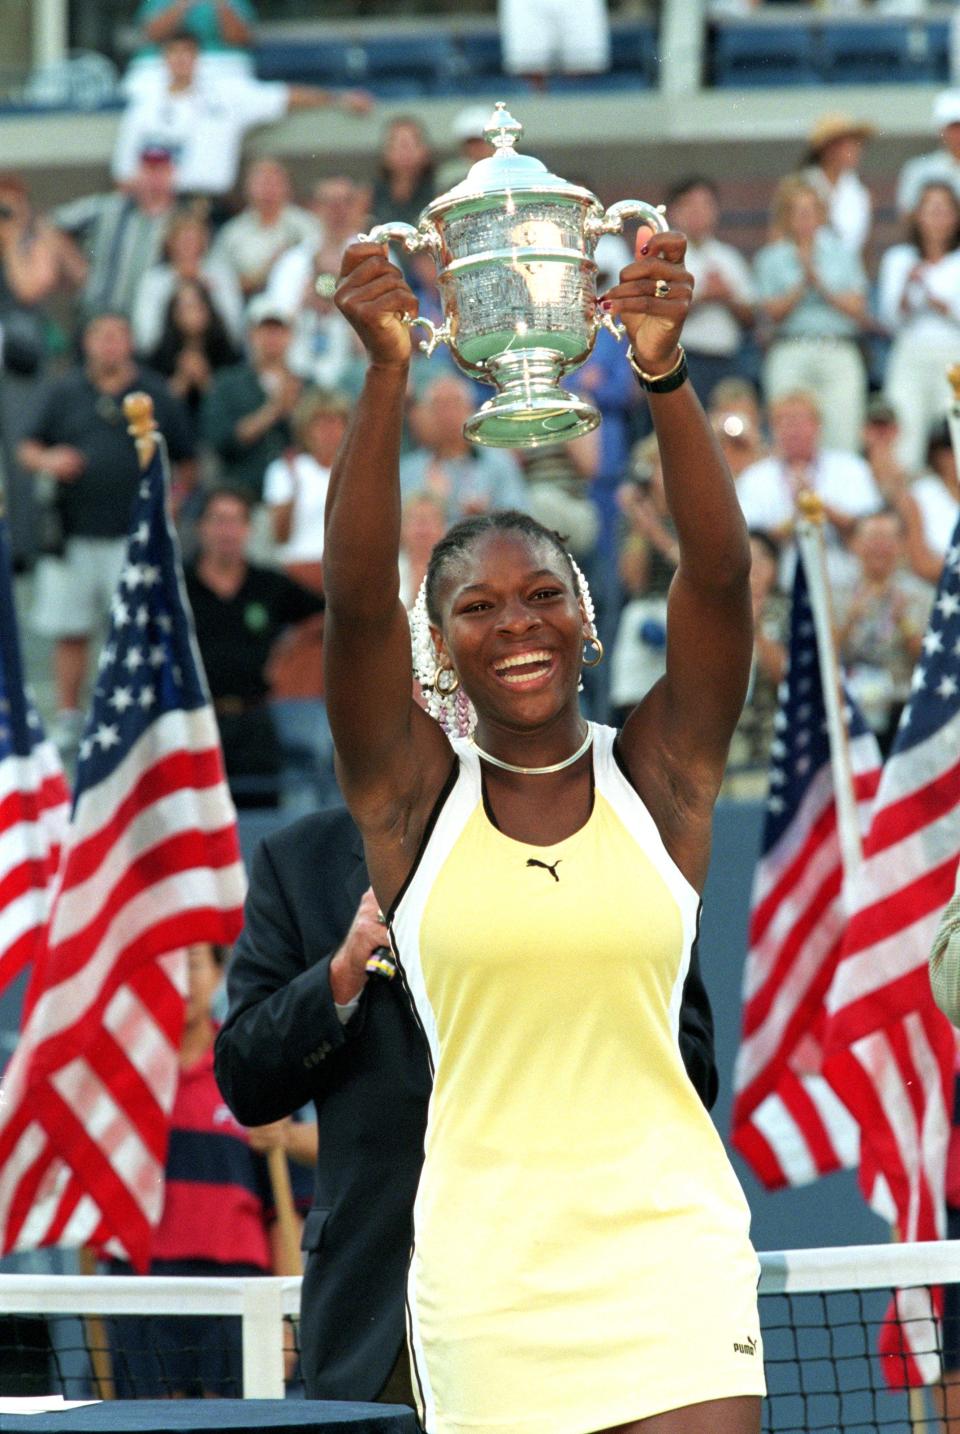 Serena Williams smiles and poses with her trophy after winning the US Open at the USTA National Tennis Courts in Flushing Meadows, New York on September 11, 1999.